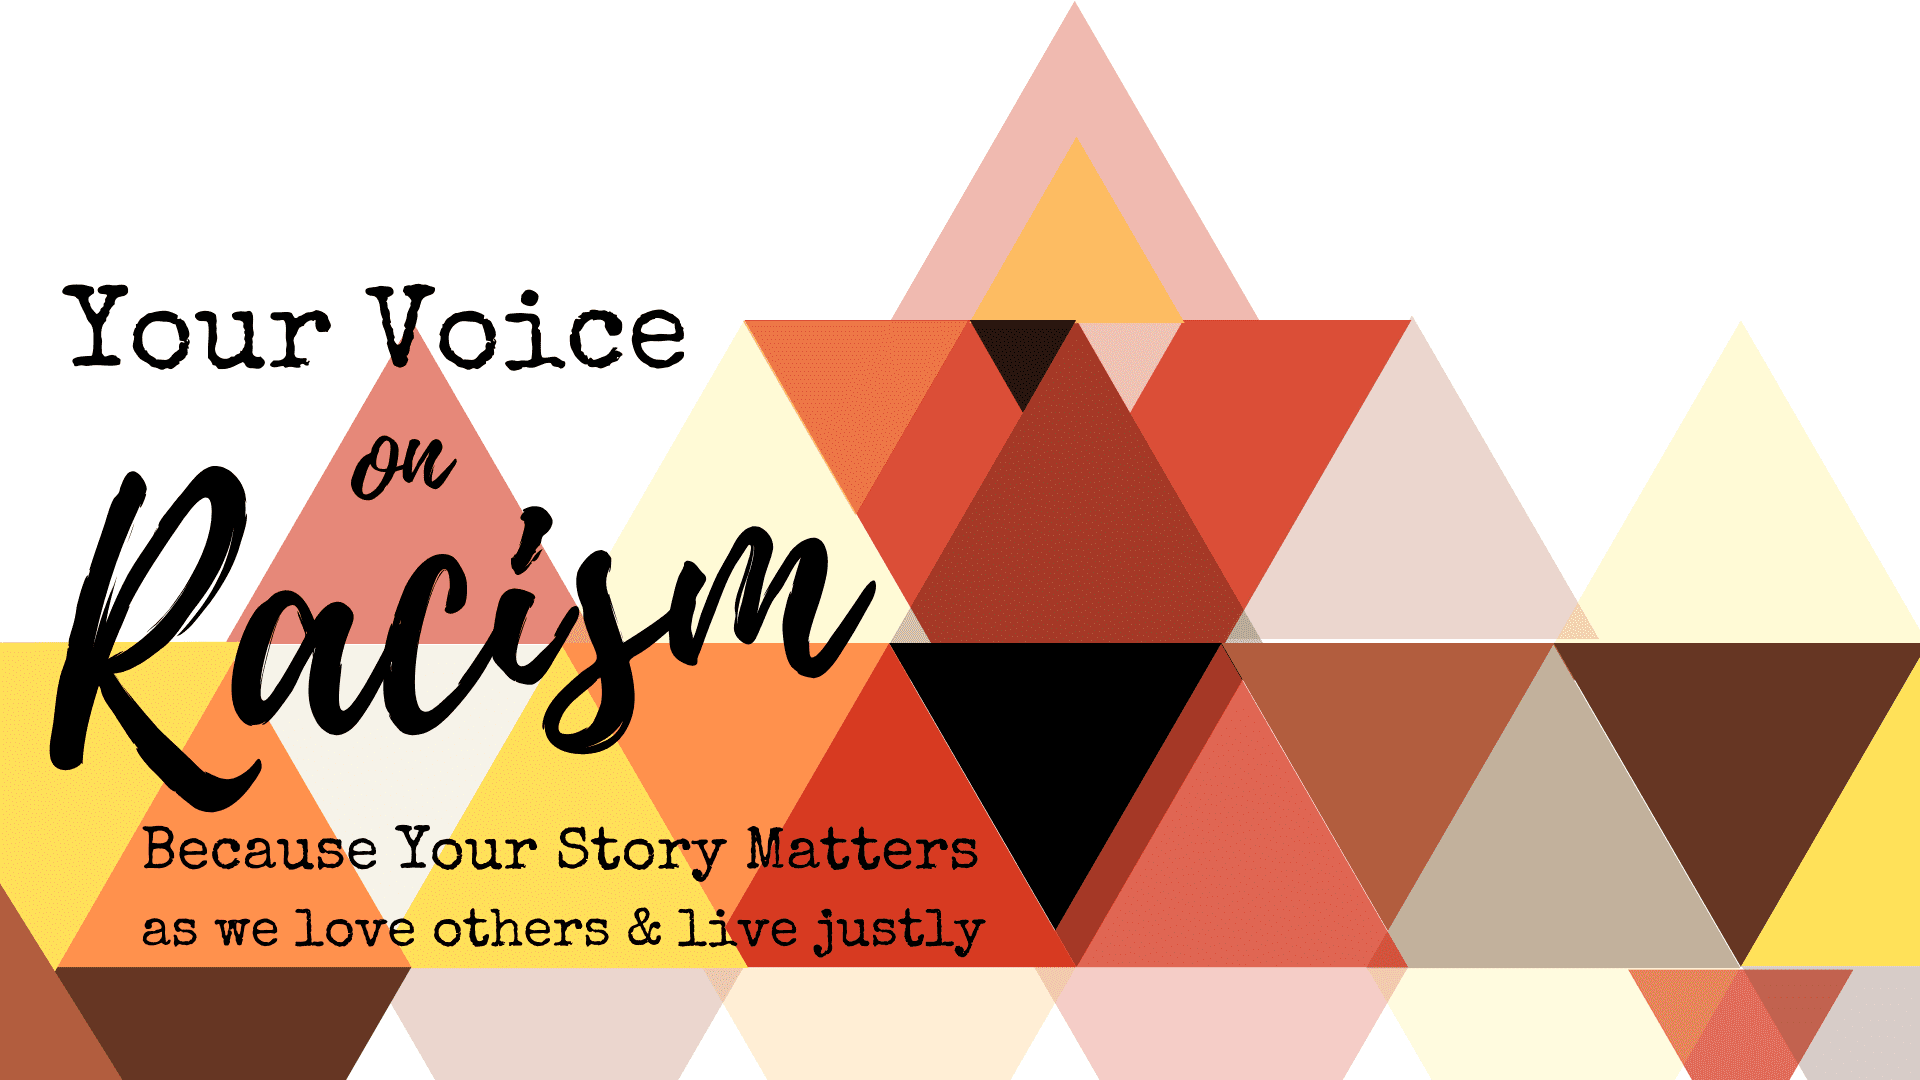 Voices on Racism Justly and Love in Story form